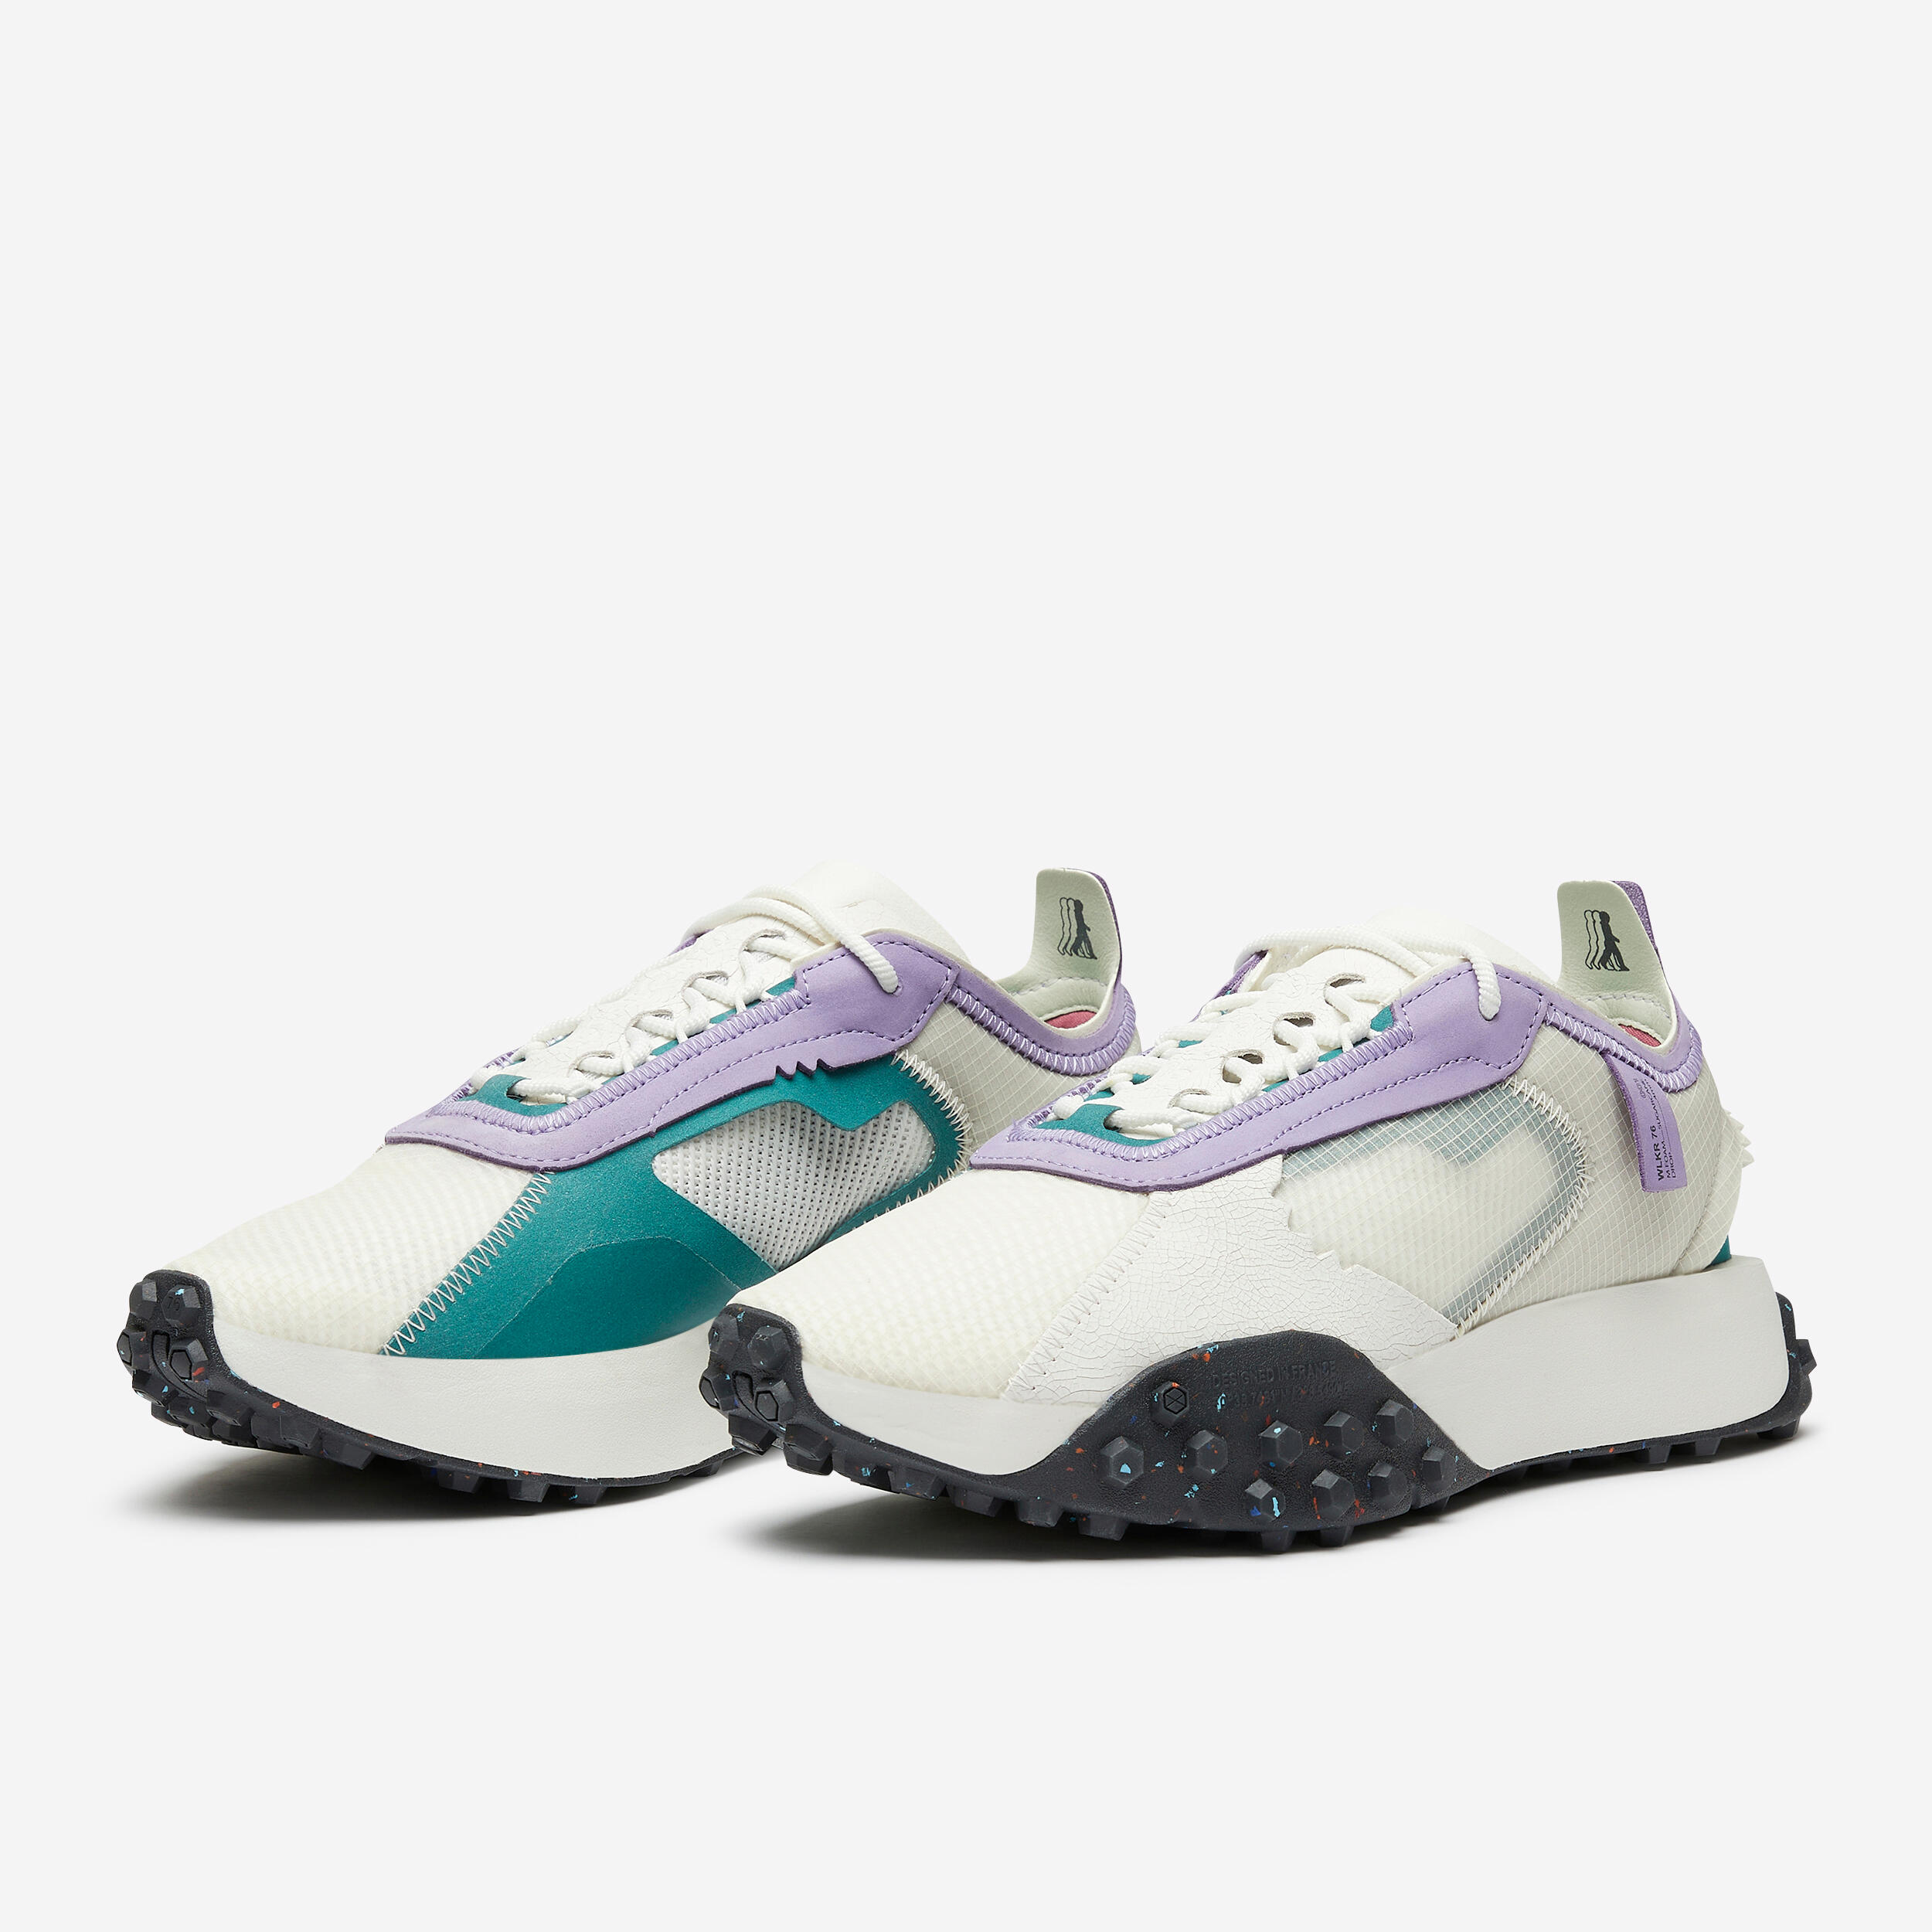 WLKR 76 Trainers-White and Purple 2/12